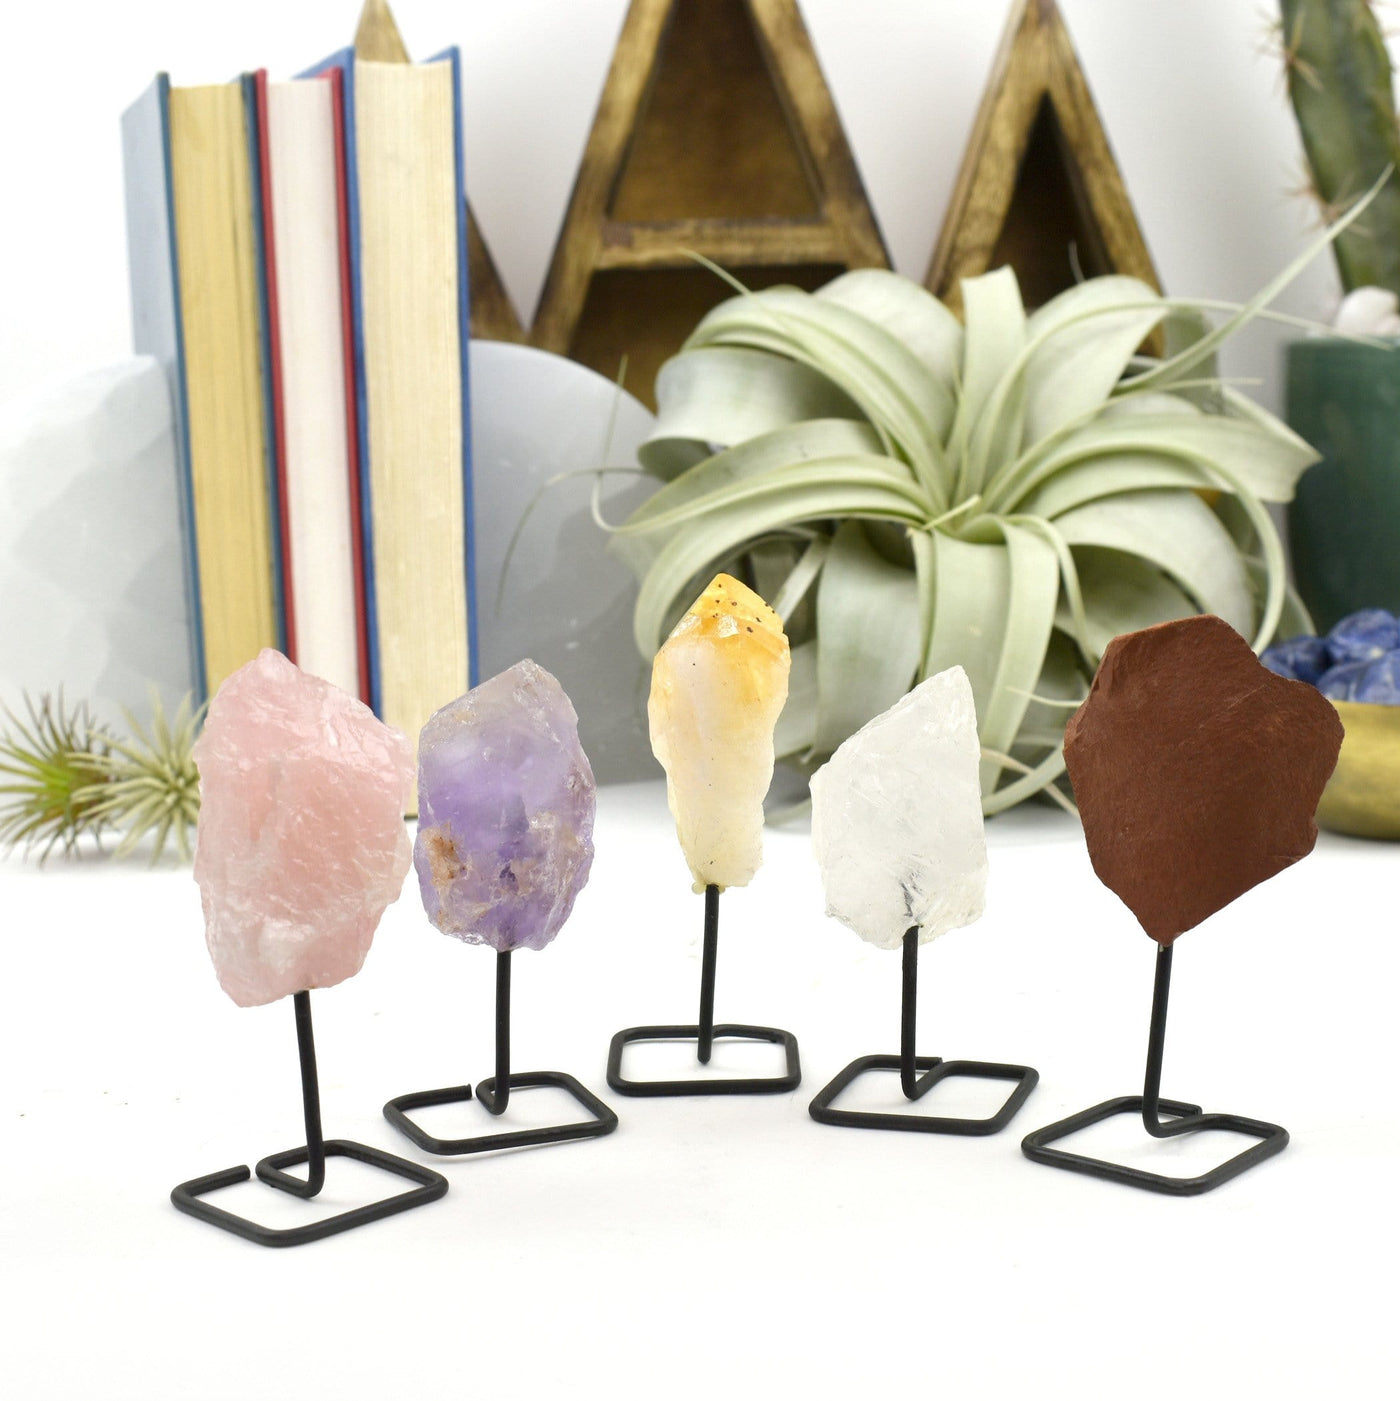 Natural Crystal Decor - Rough Stone on Metal Stand - 5 stones on a table